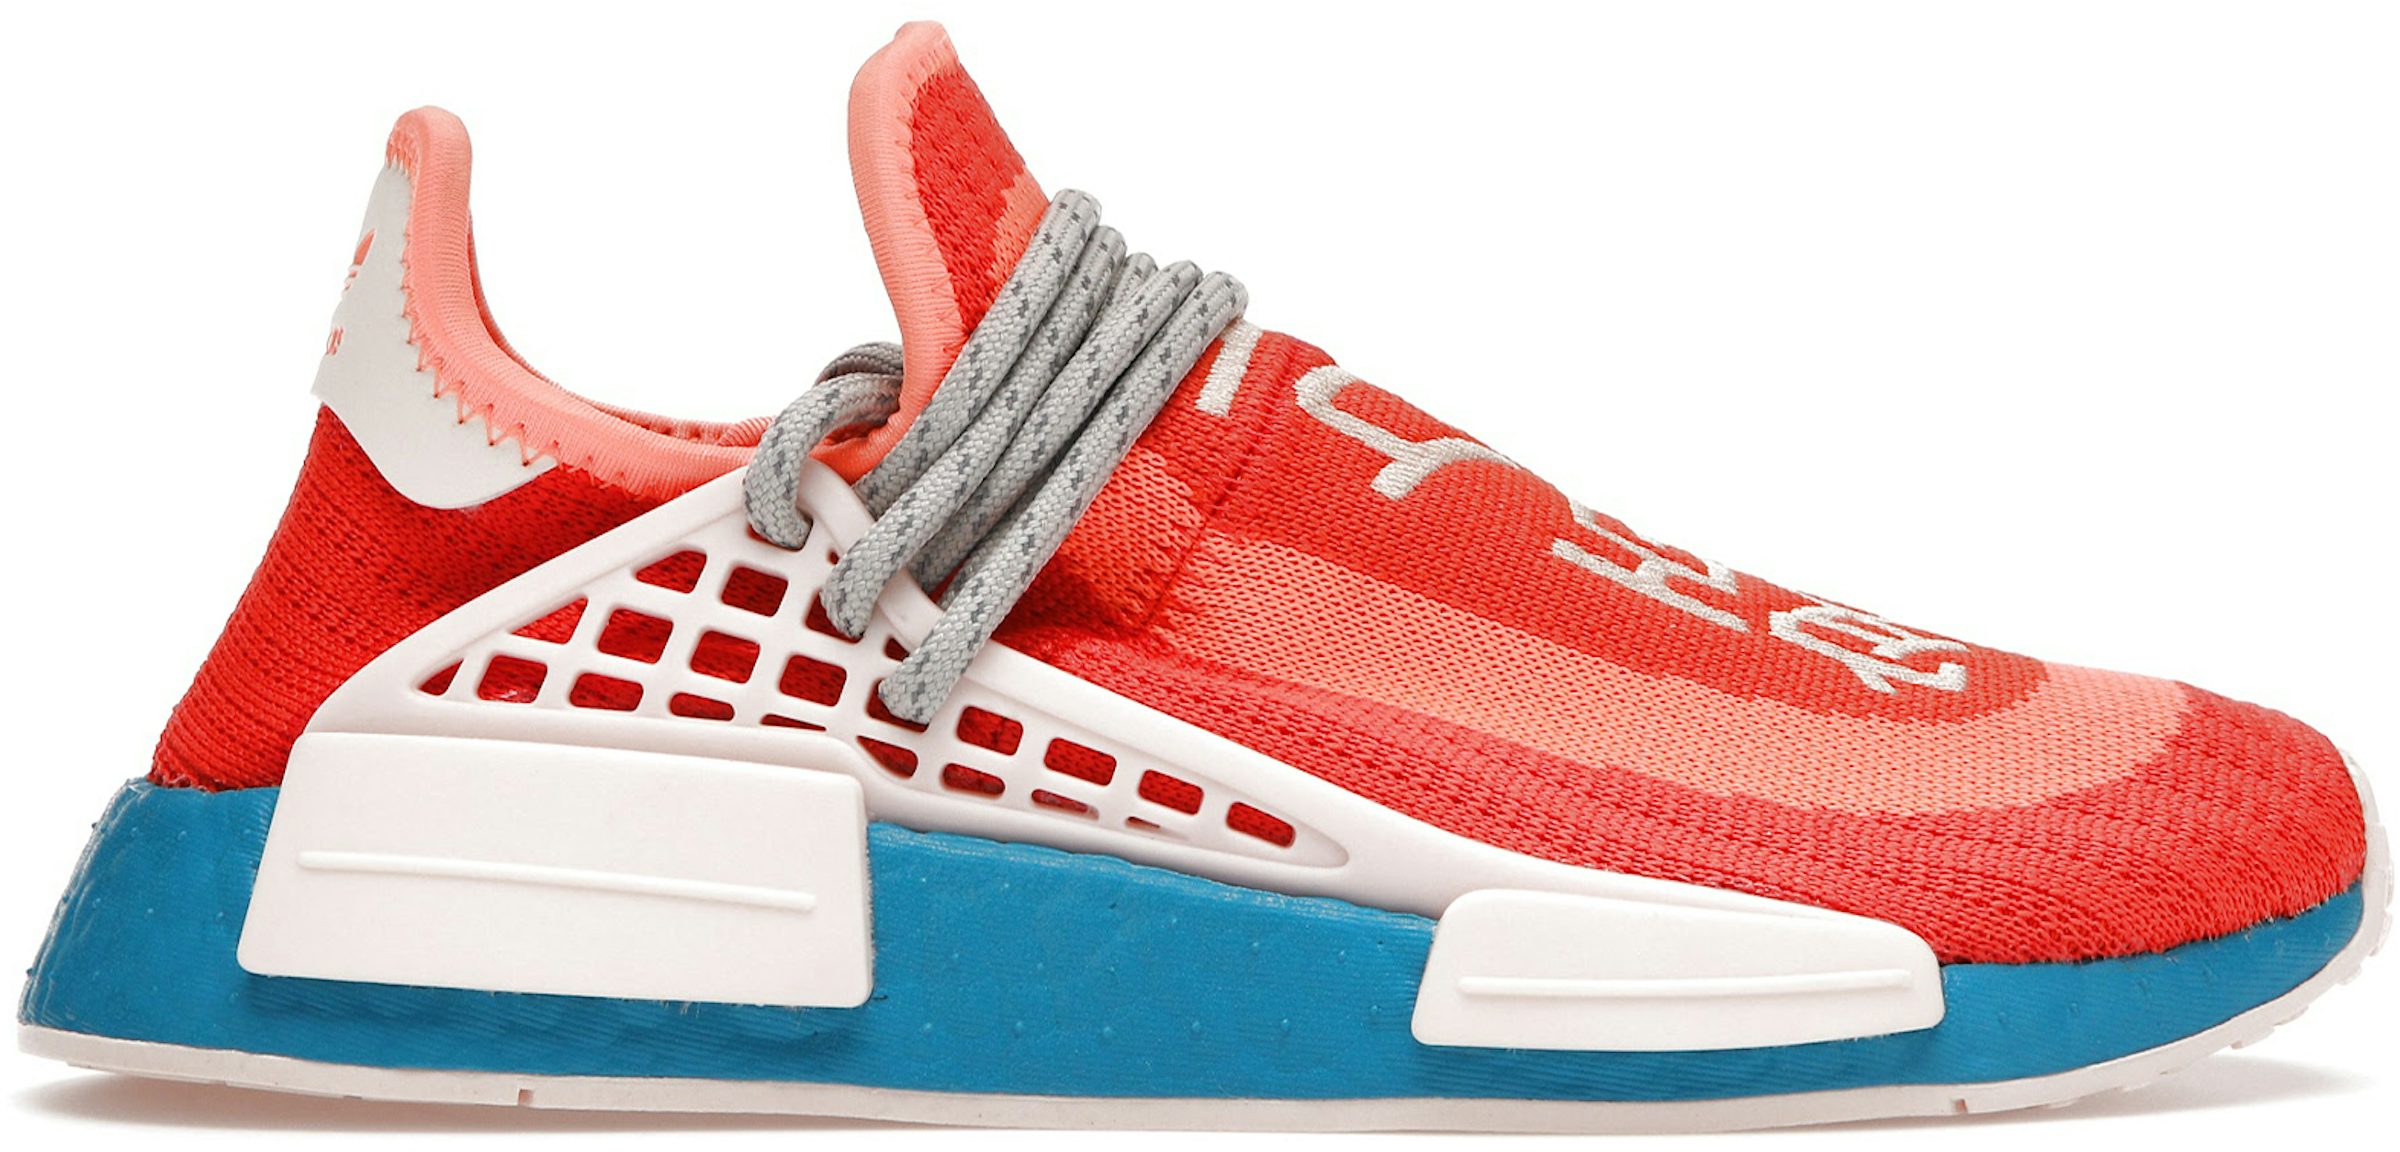 Pharrell Williams: Pharrell Williams x Adidas NMD S1 MAUBS shoes: Where  to buy, price, release date, and more details explored